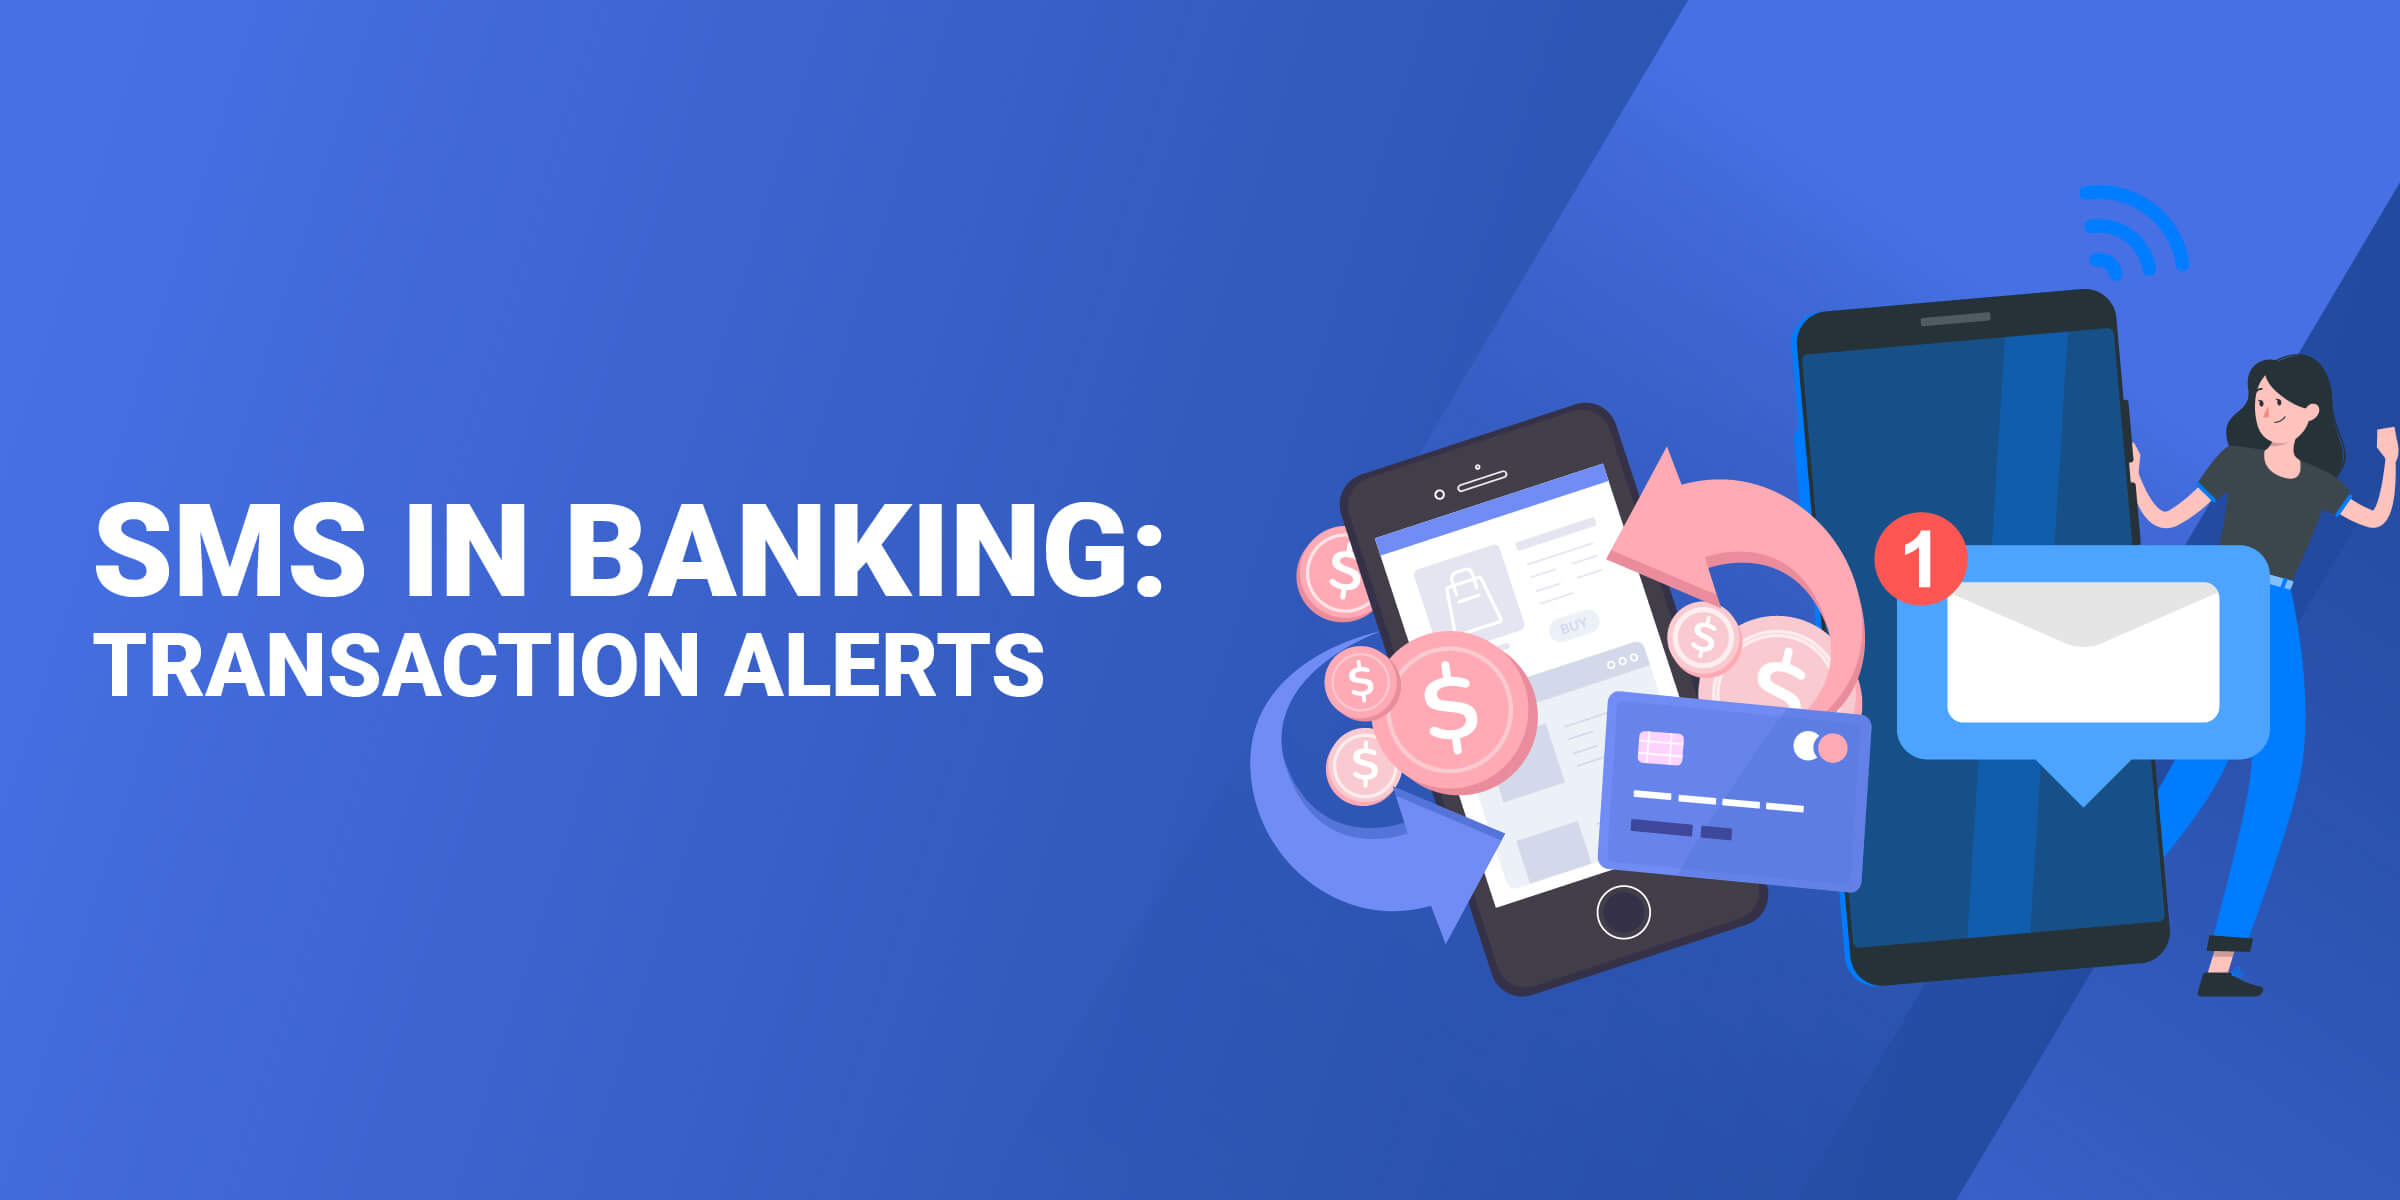 SMS in Banking Transaction Alerts